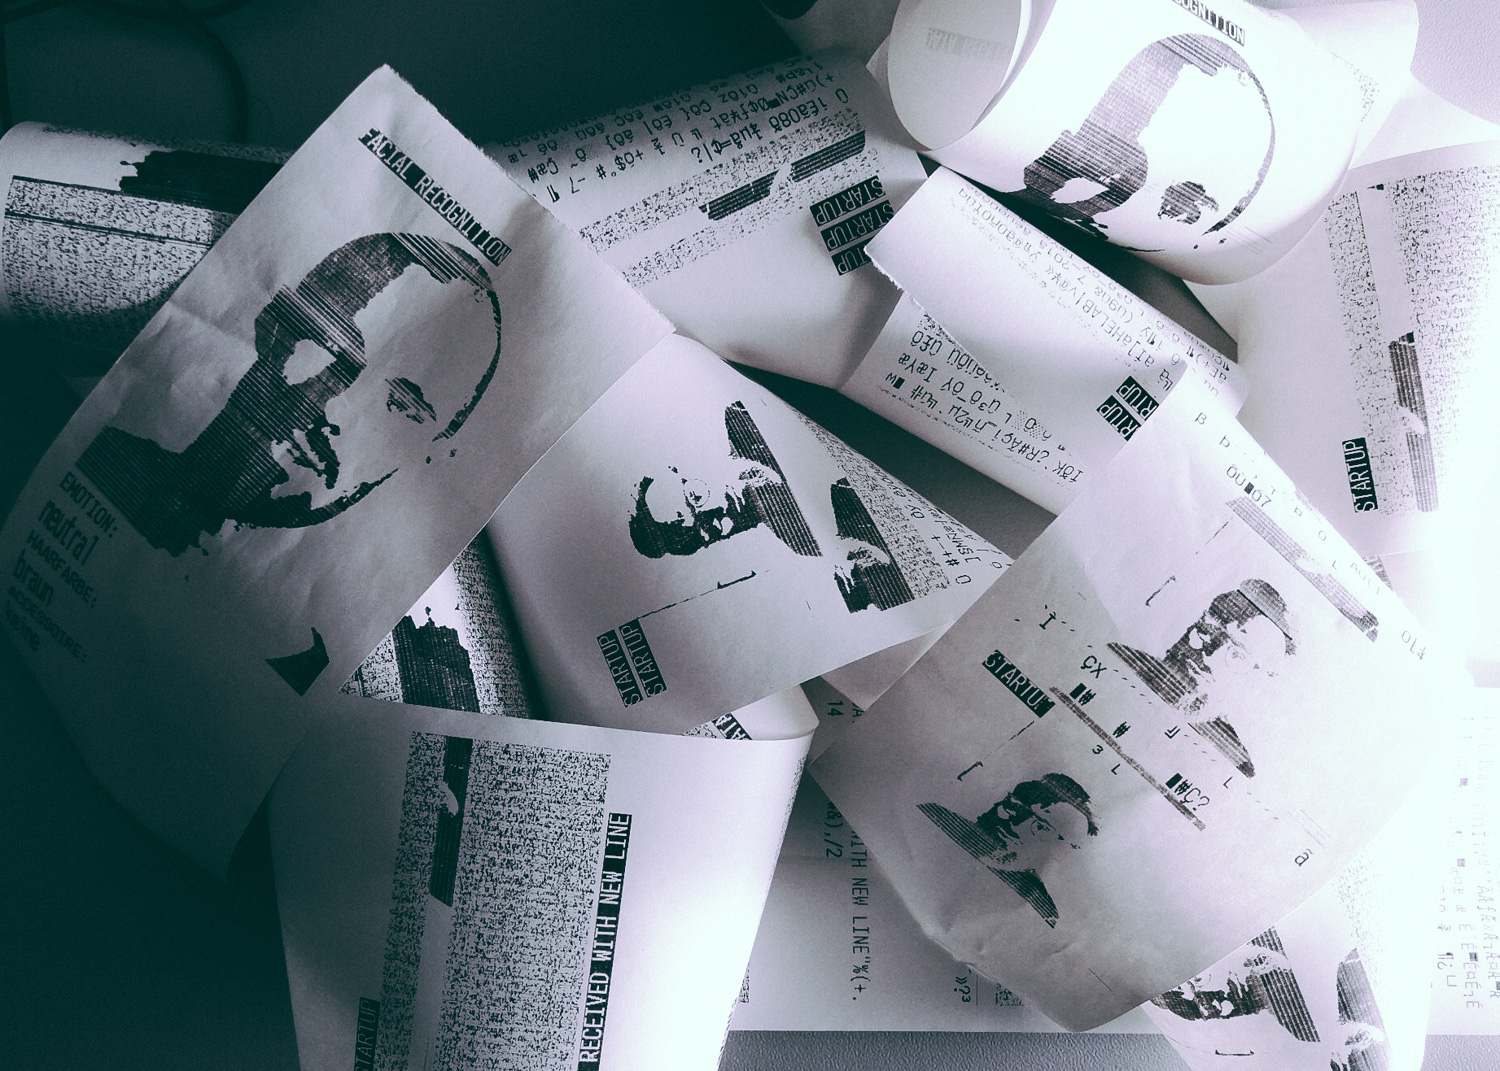 Test run of our thermal printer for the AI Photobooth